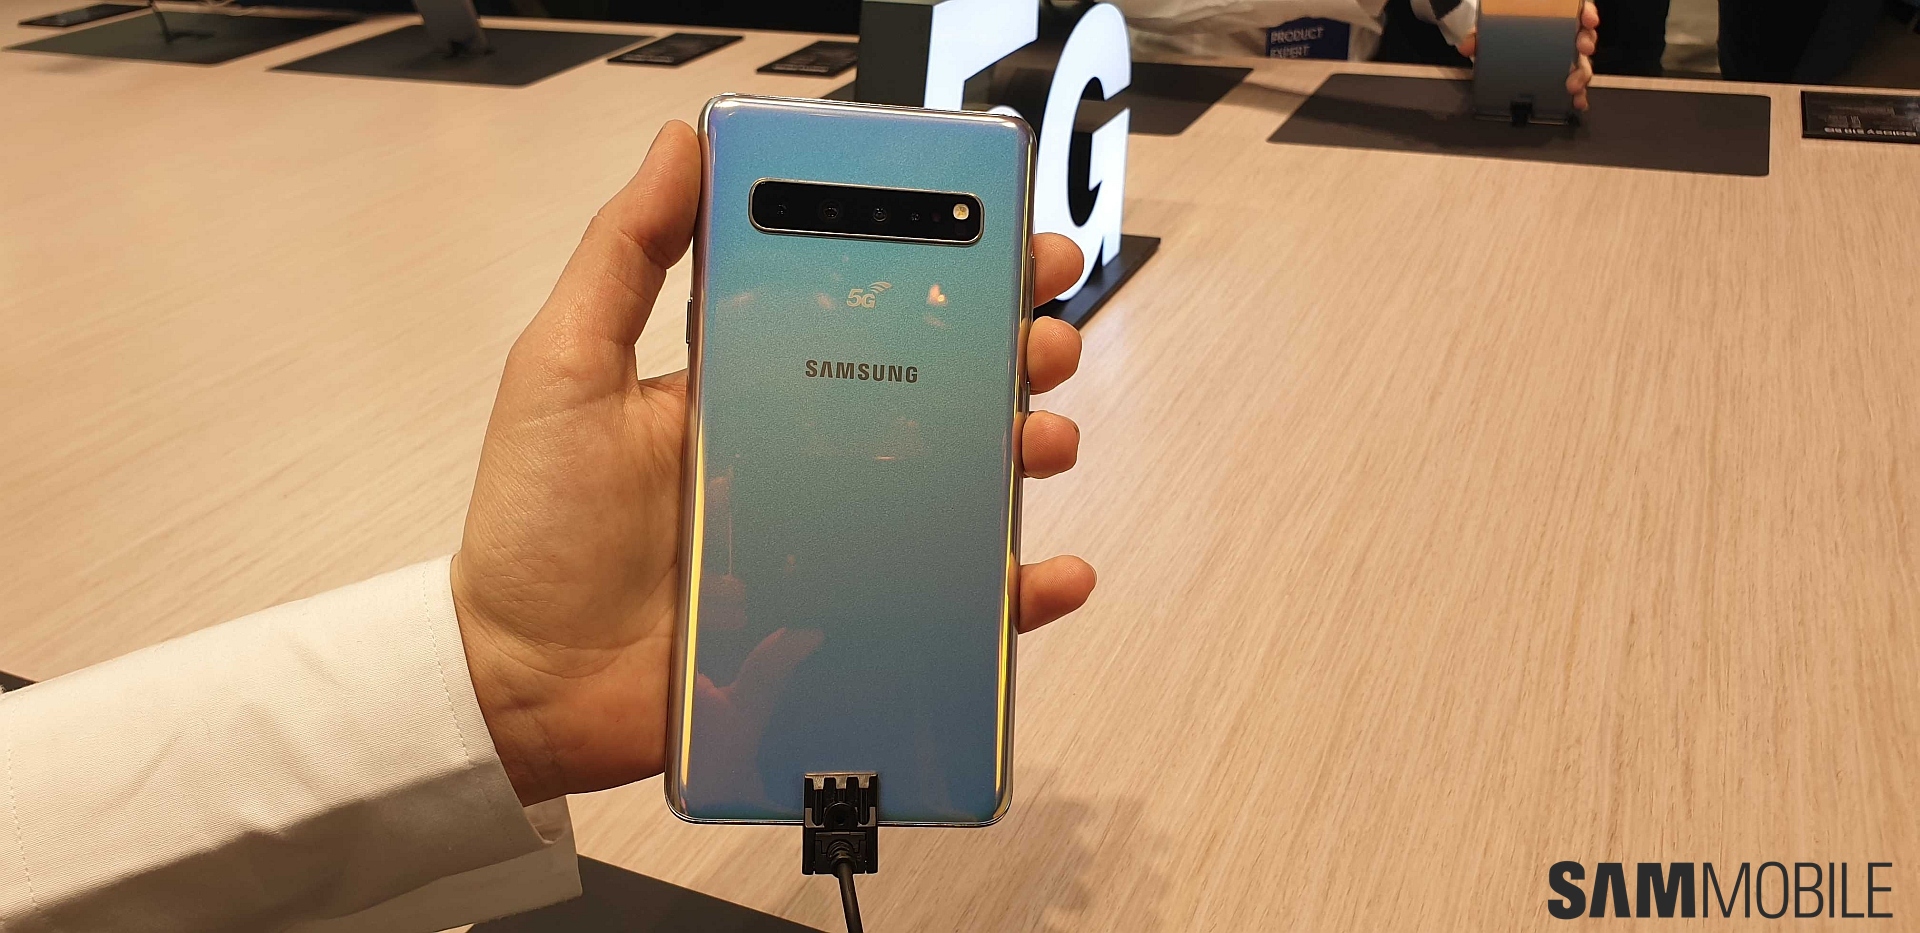 Samsung confirms the Galaxy S10 5G release date is April 5 - SamMobile